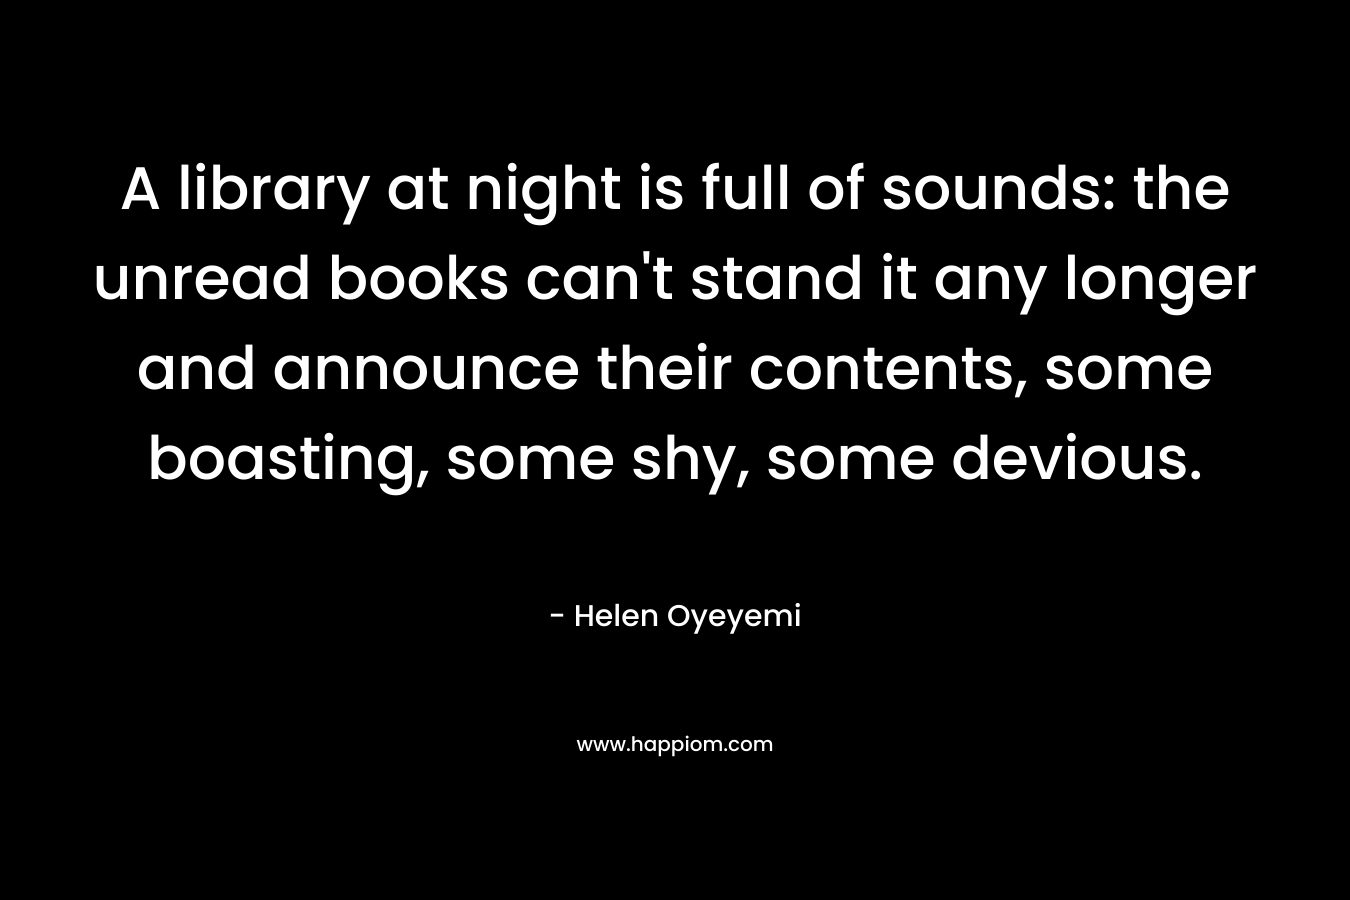 A library at night is full of sounds: the unread books can’t stand it any longer and announce their contents, some boasting, some shy, some devious. – Helen Oyeyemi